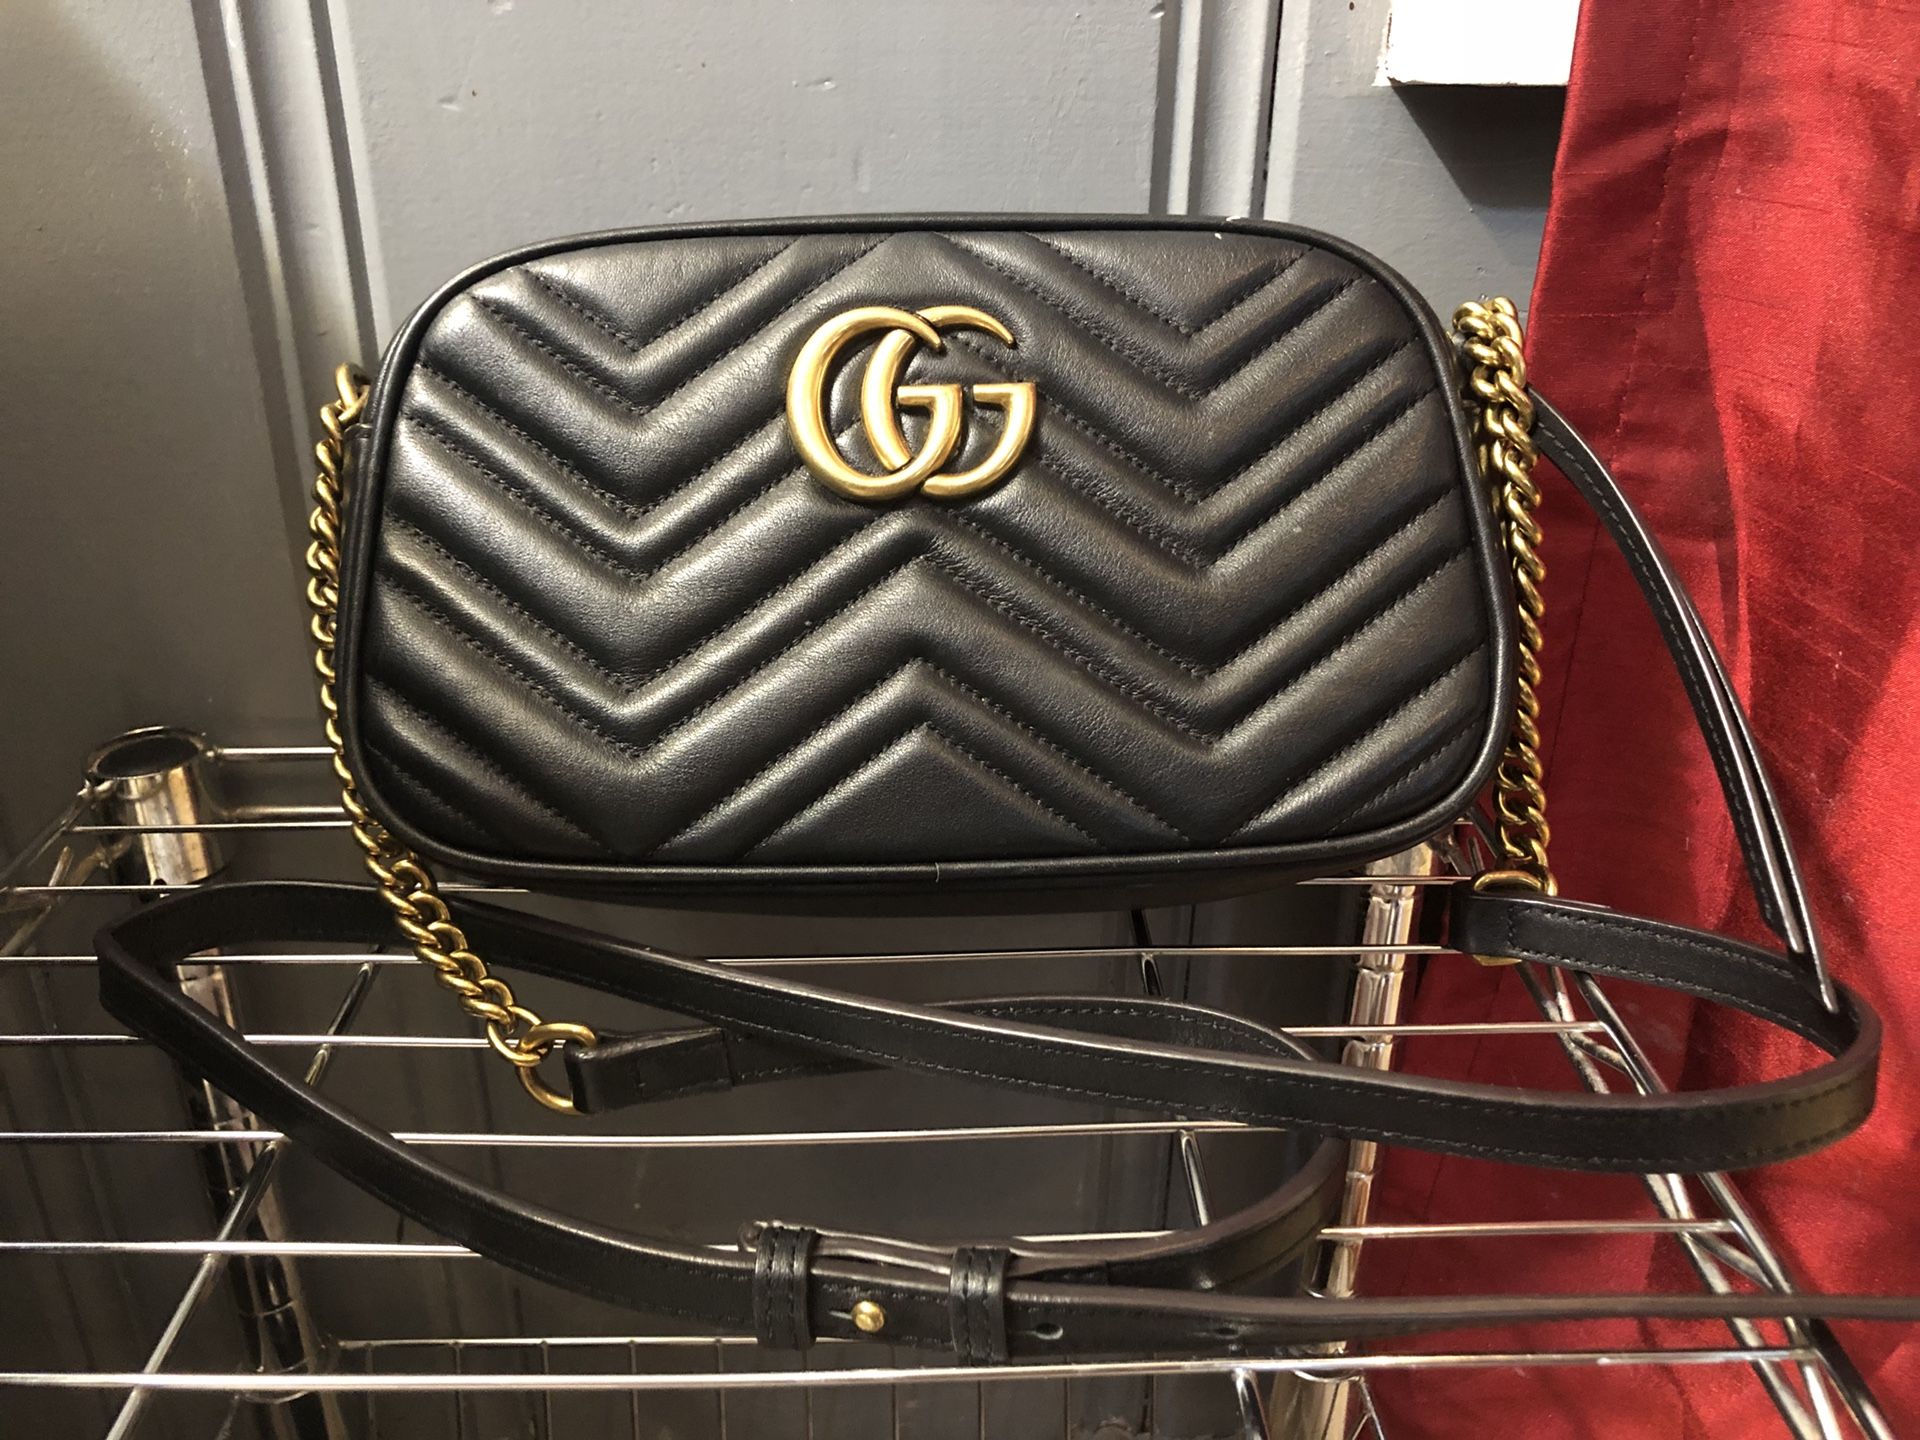 Authentic Gucci Large Black Leather Embossed Speedy Bag for Sale in  Murrieta, CA - OfferUp